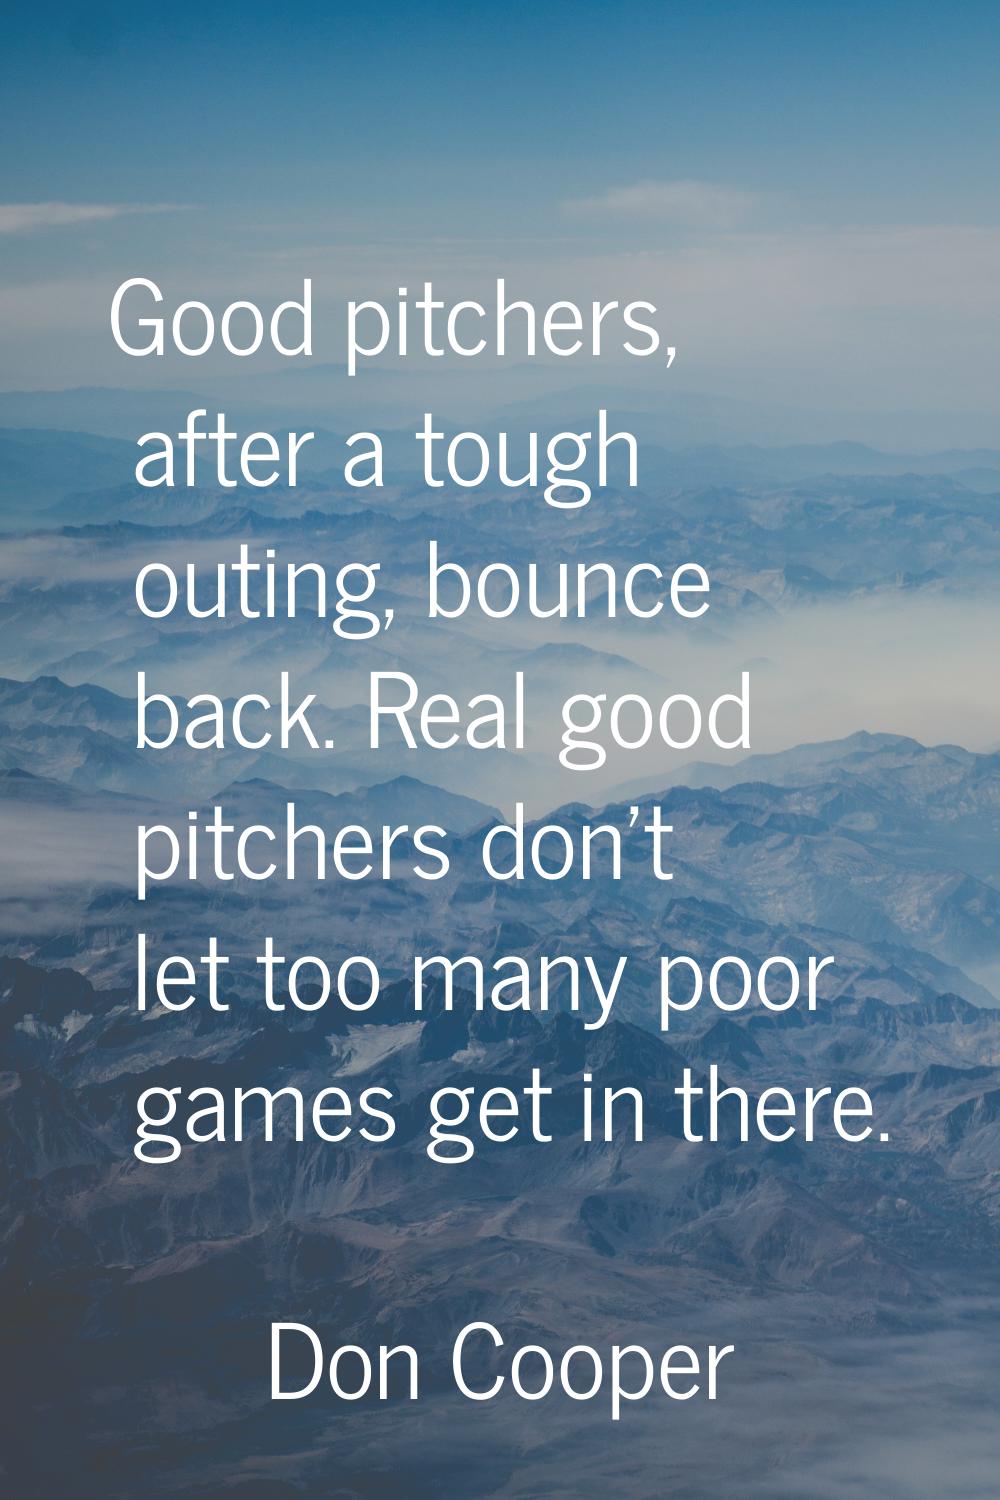 Good pitchers, after a tough outing, bounce back. Real good pitchers don't let too many poor games 